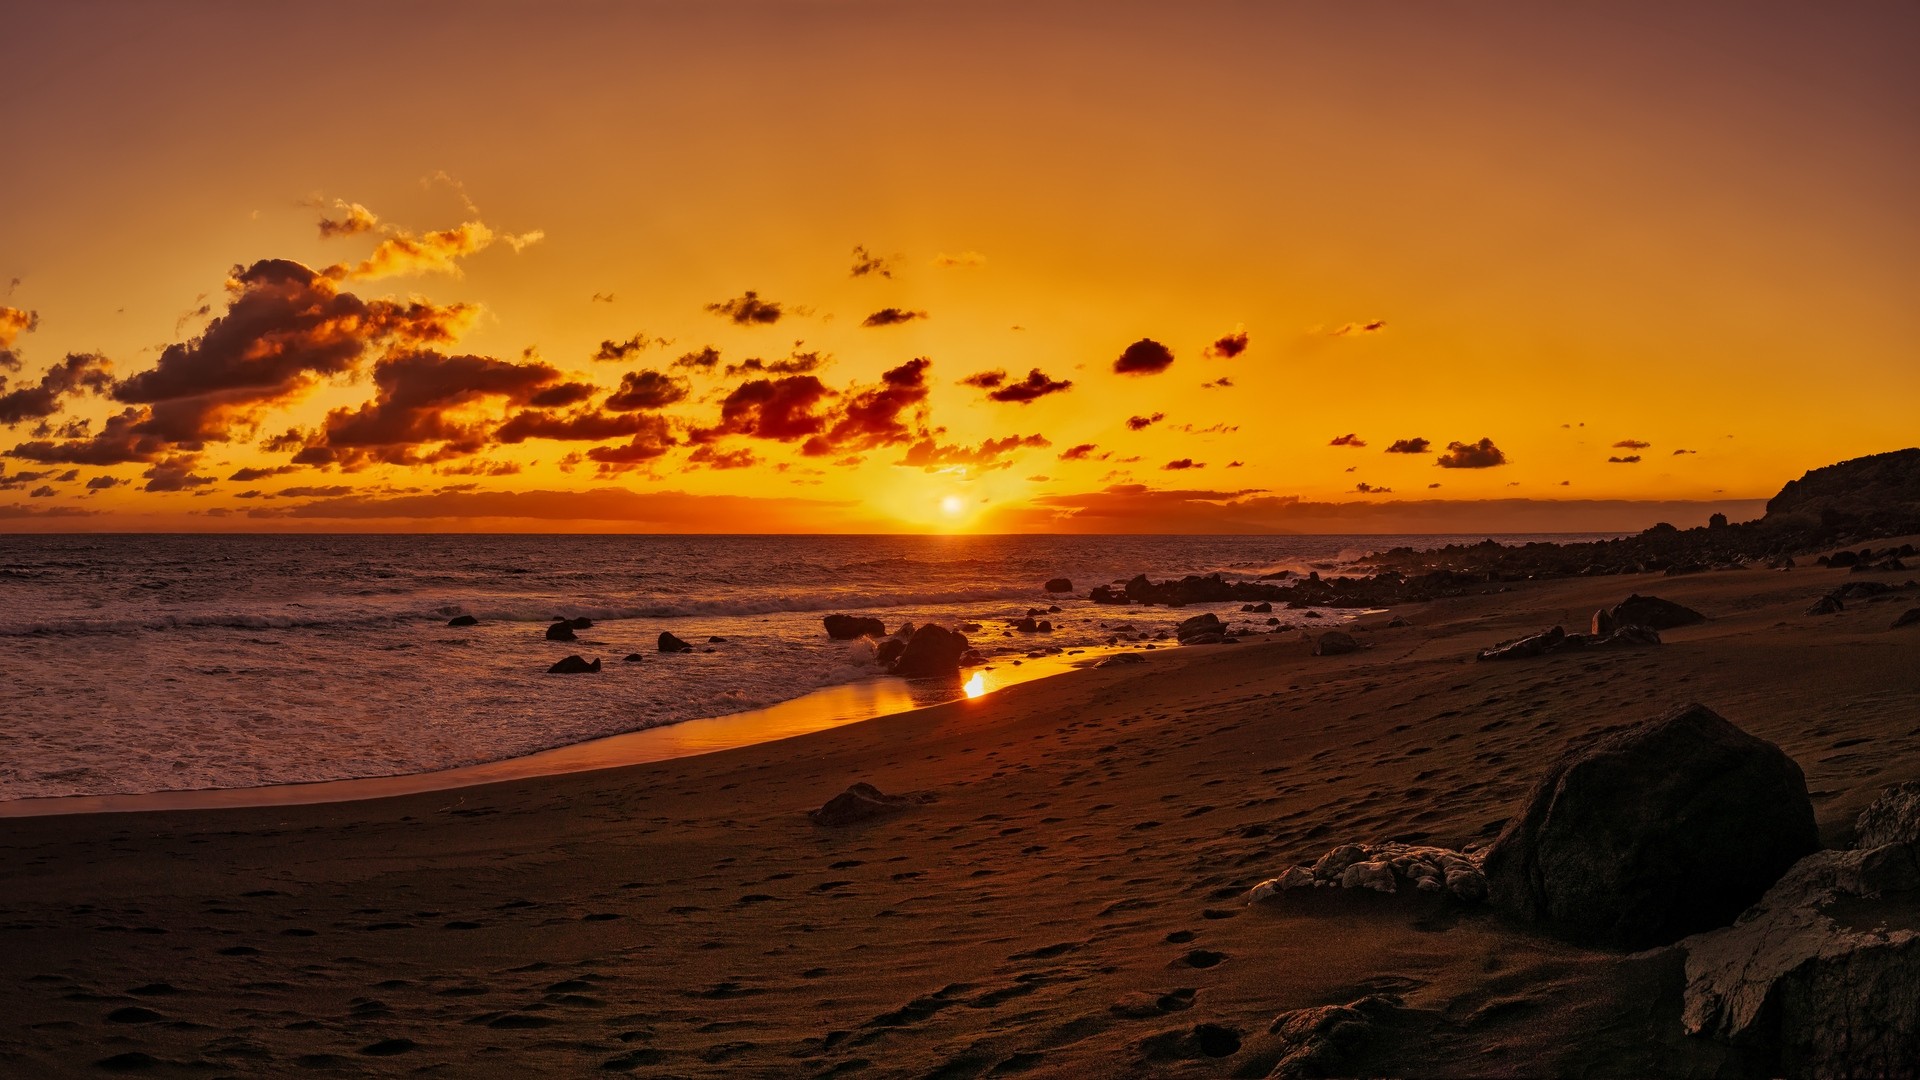 1920x1080 wallpapers: ocean, sunset, coast, sand, Canary Islands, Valle Gran Rey, Spain (image)